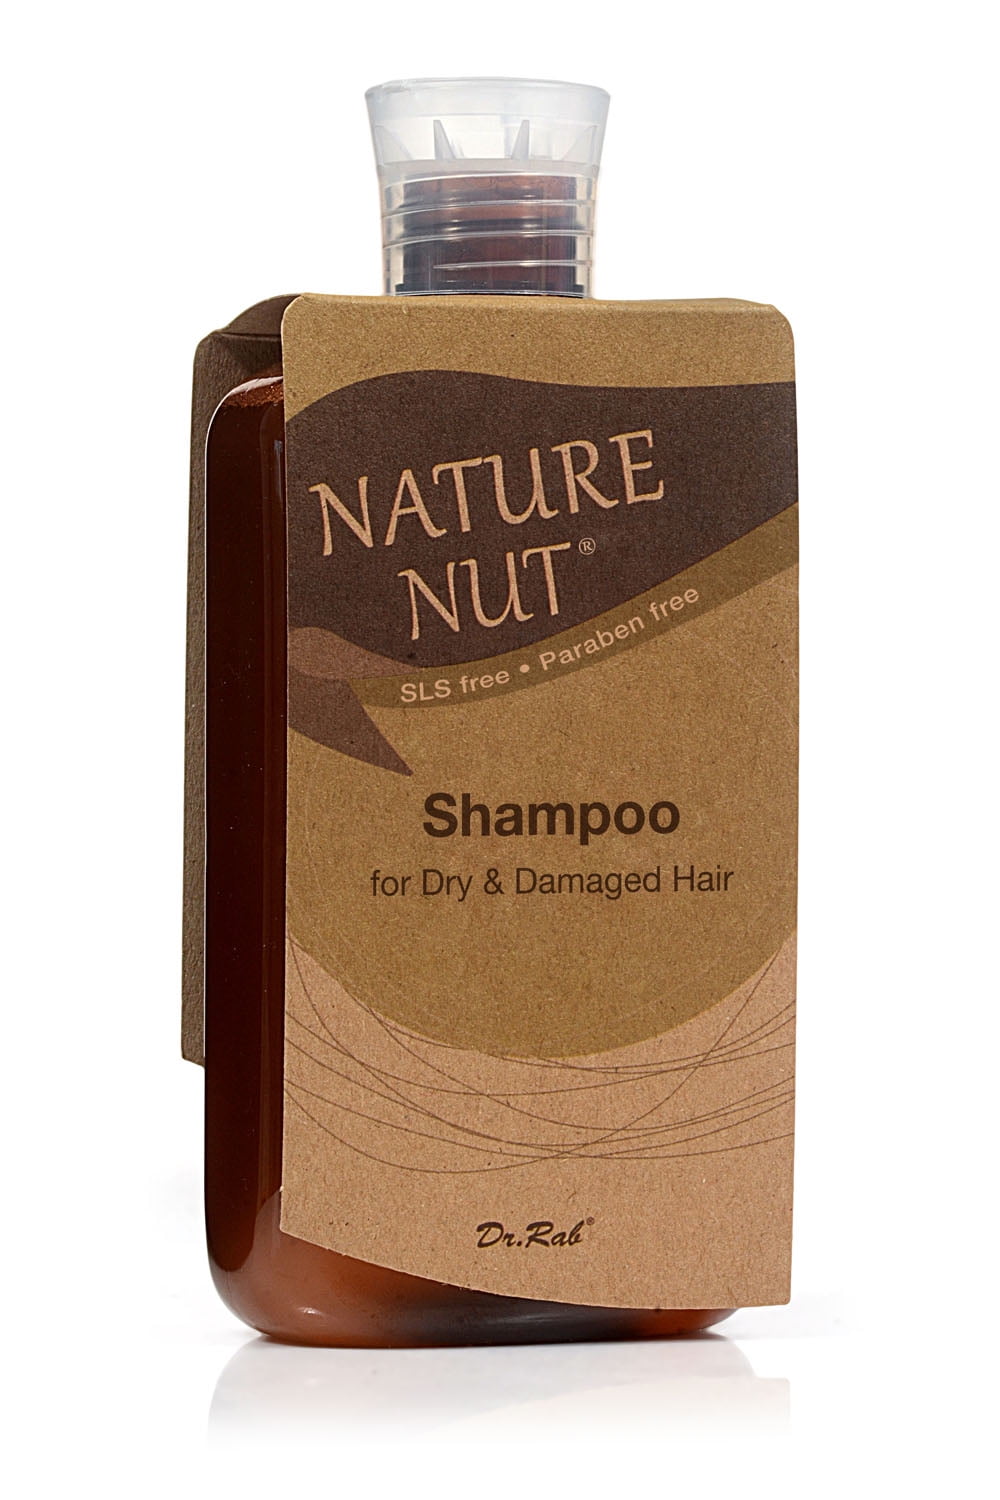 Bugsering Pilgrim tre Nature Nut Dry Hair Shampoo for dry damaged and processed hair with Shea  Butter and oils from Argan, Macadamia, Coconut, and Brazil nuts. 13.5 fl.  Oz. Sodium Chloride free - Walmart.com